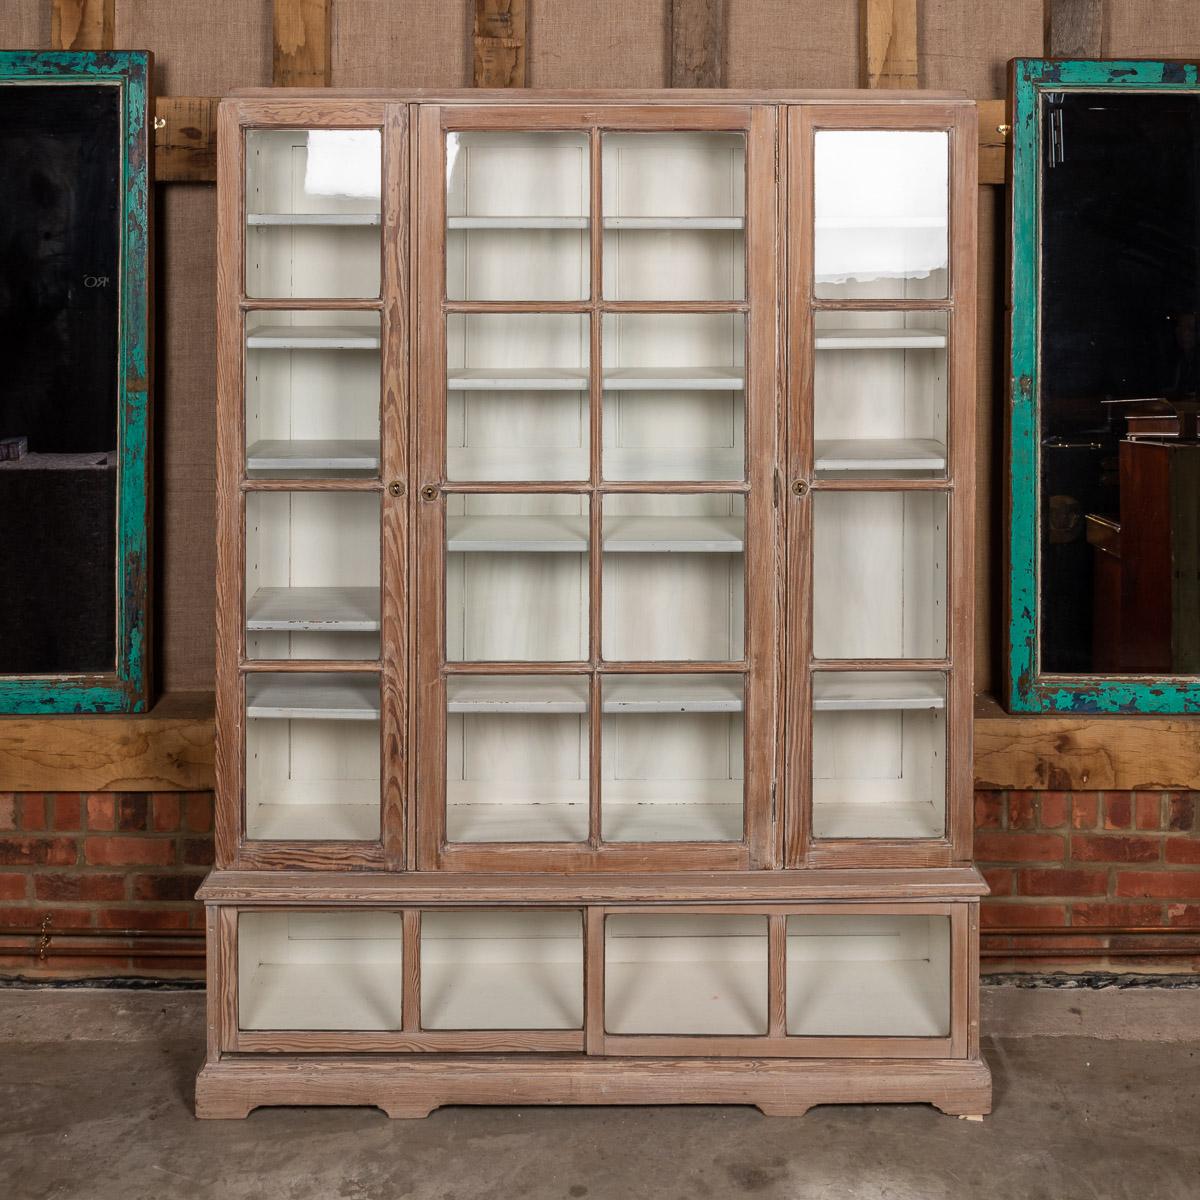 Antique early-20th century French glass-fronted limed display cabinet with four storage drawers to the base.

Measures: Height: 203cm
Width: 158cm
Depth: 38cm.